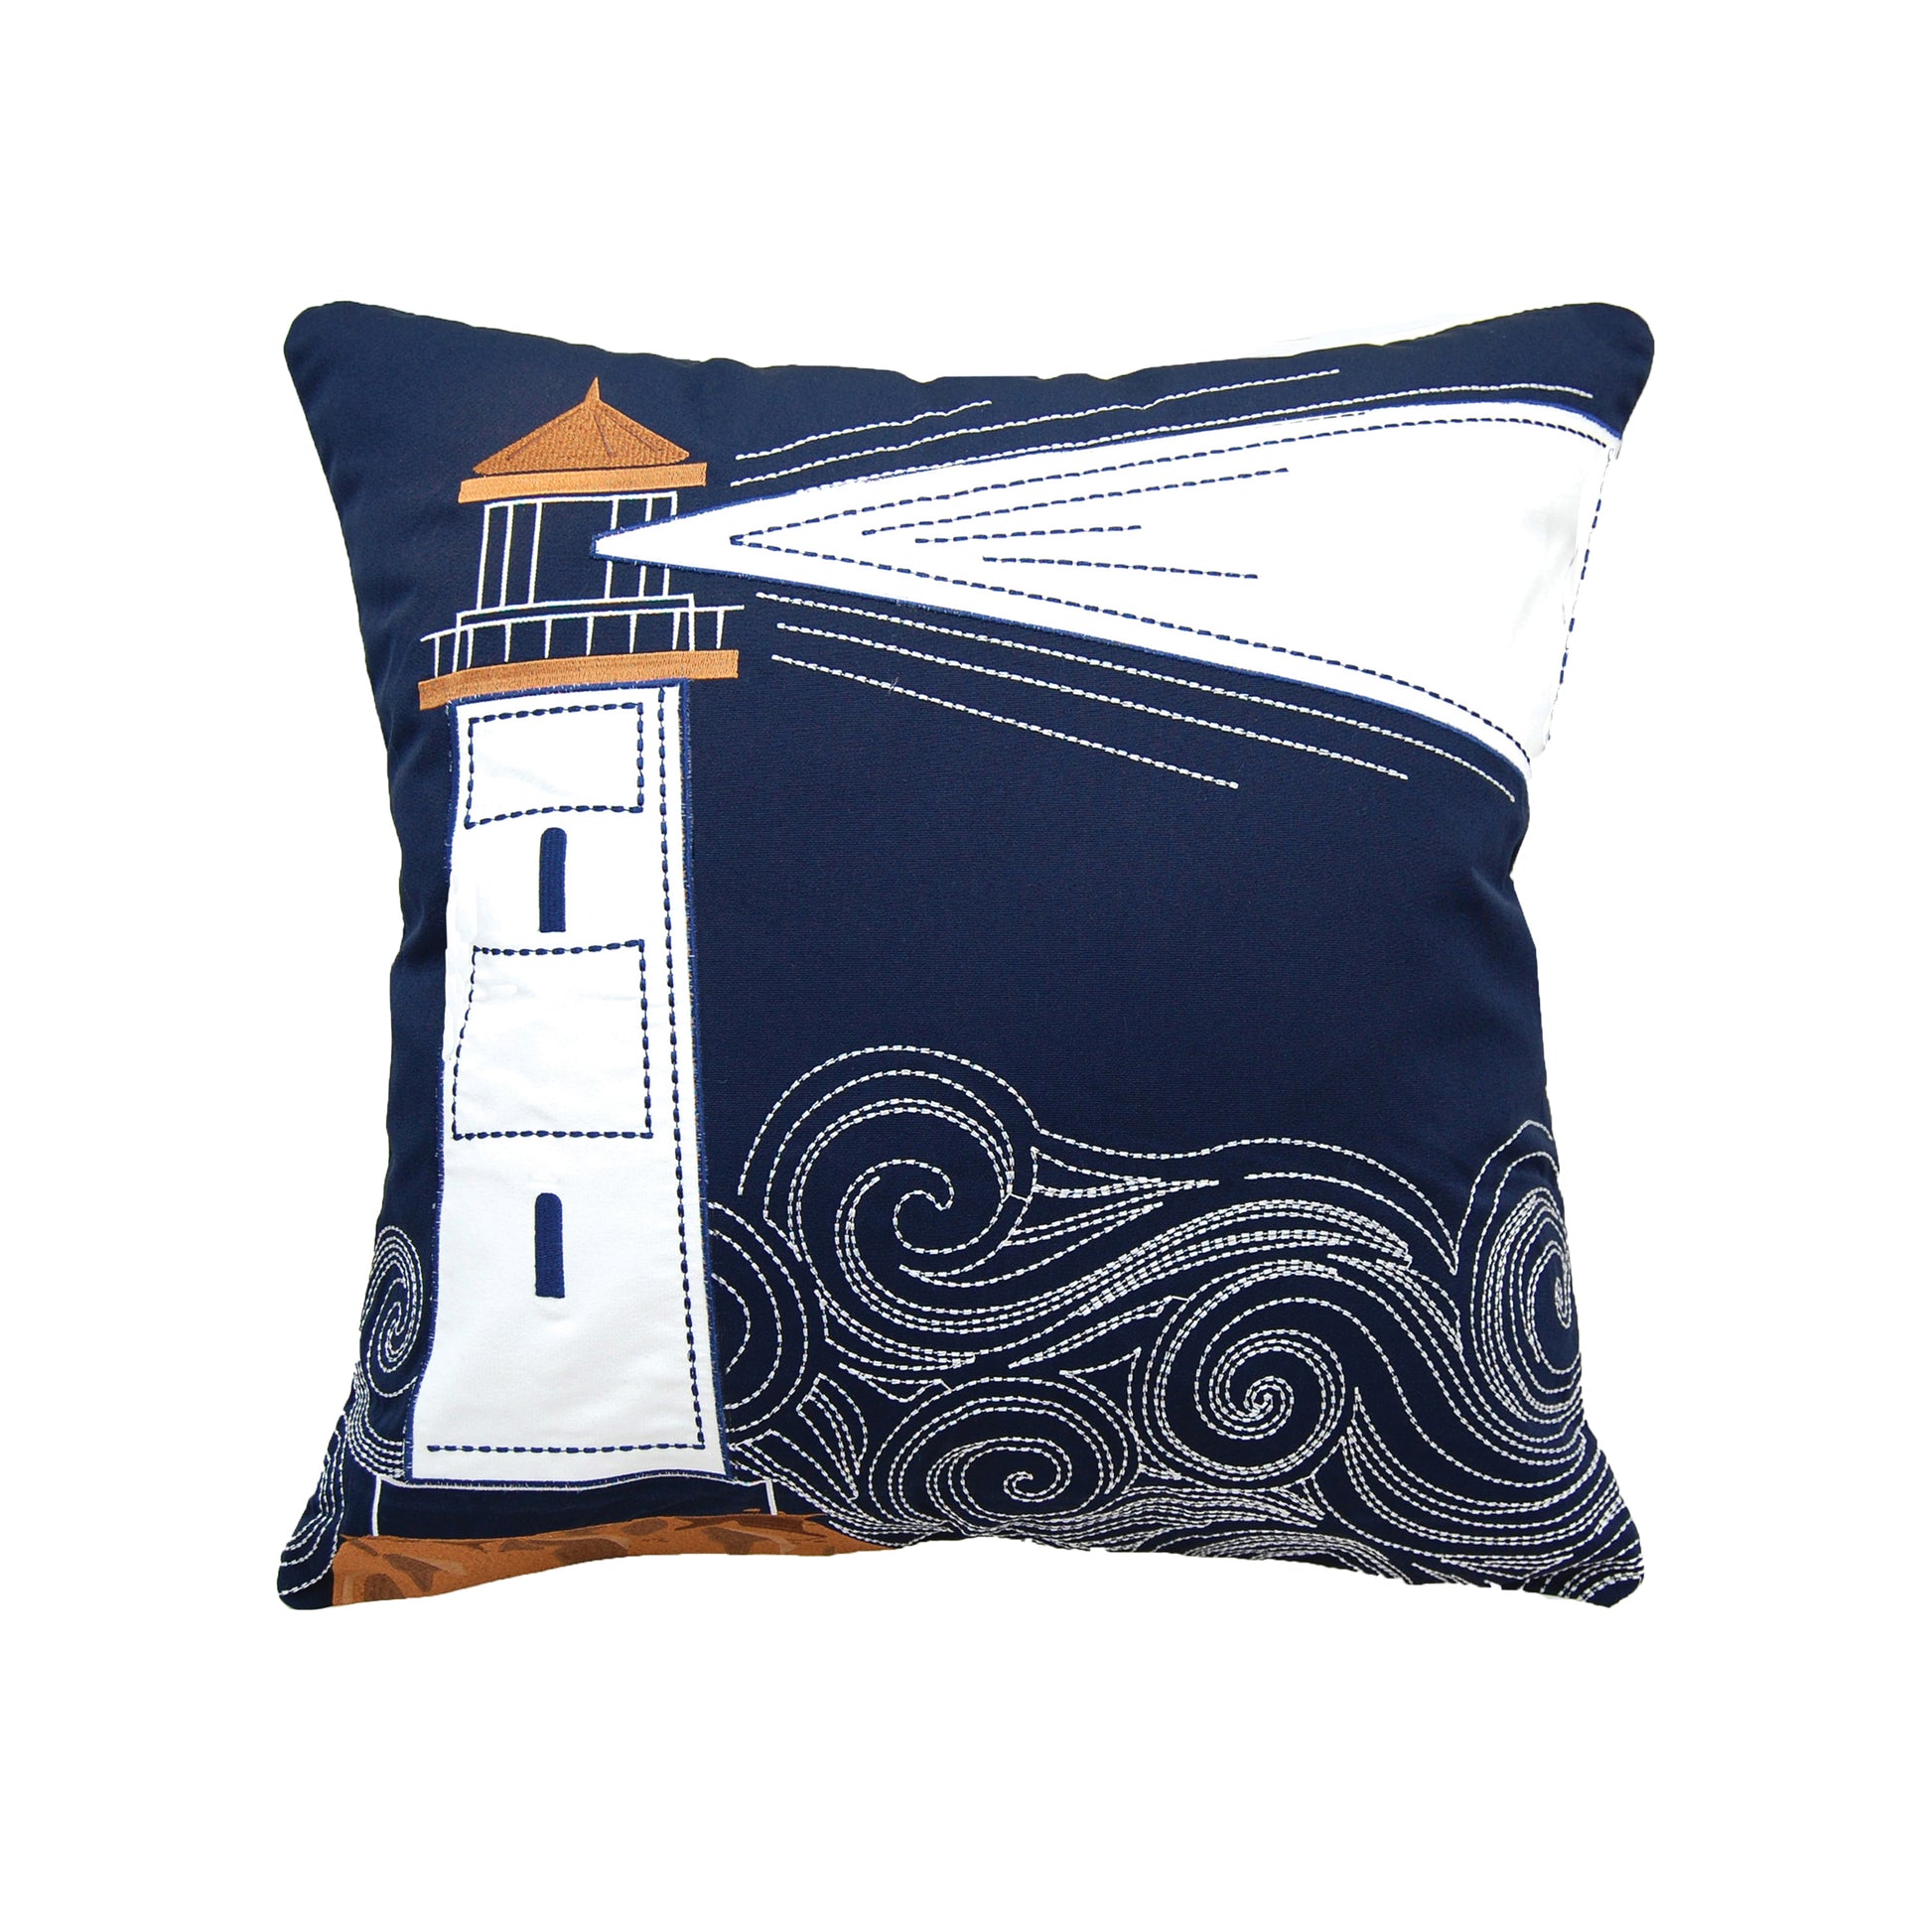 White and tan applique lighthouse embroidered on a blue background surrounded by swirling waves.